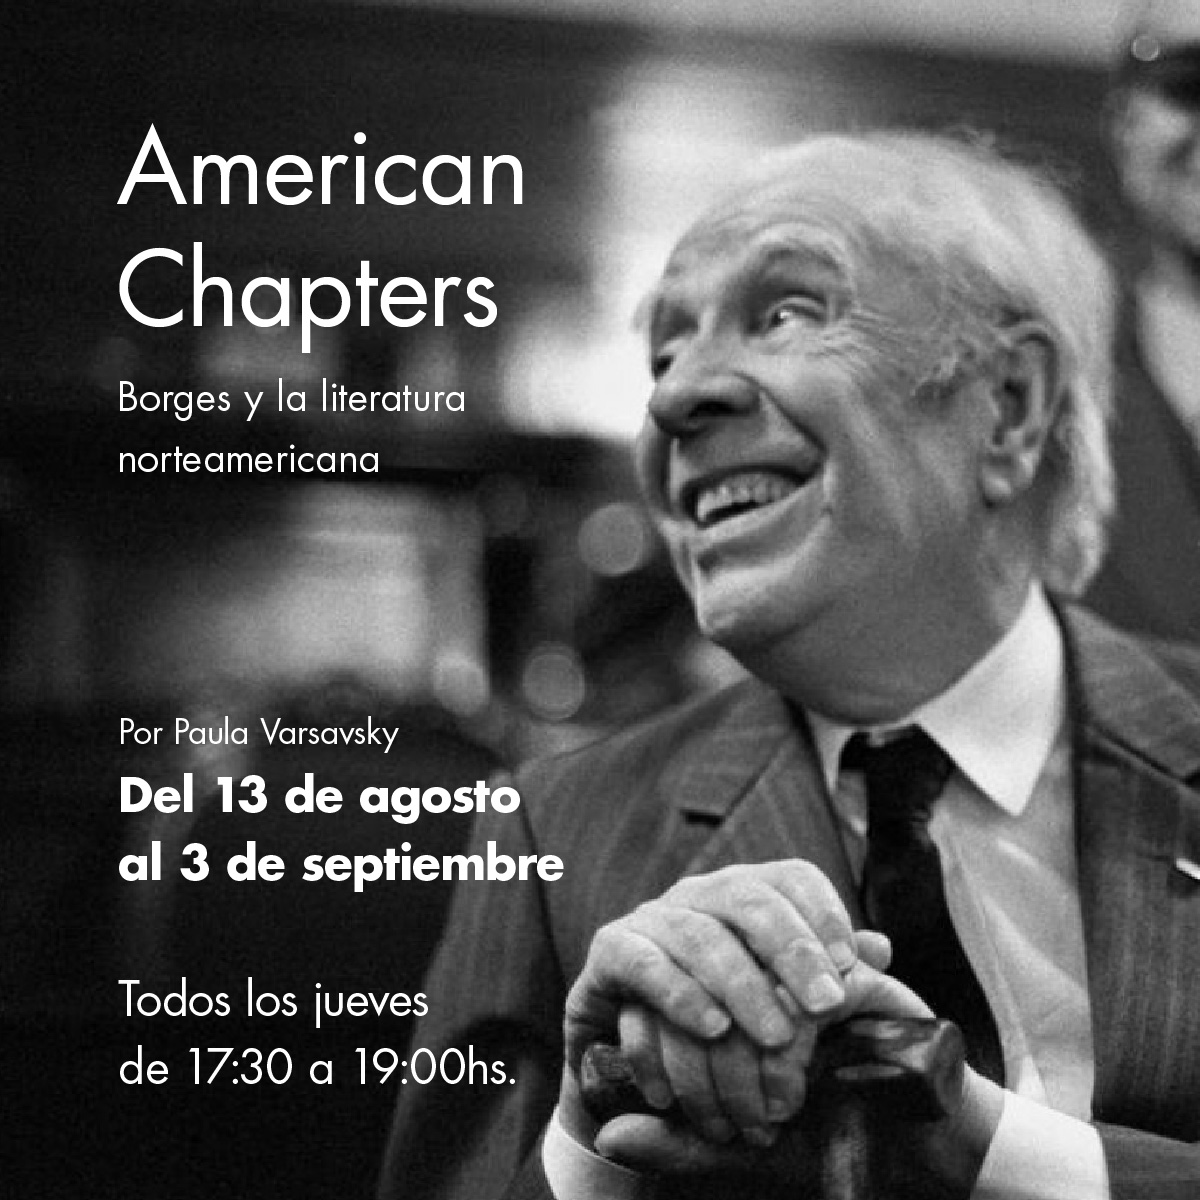 American-Chapters-Borges-posteo-general-2